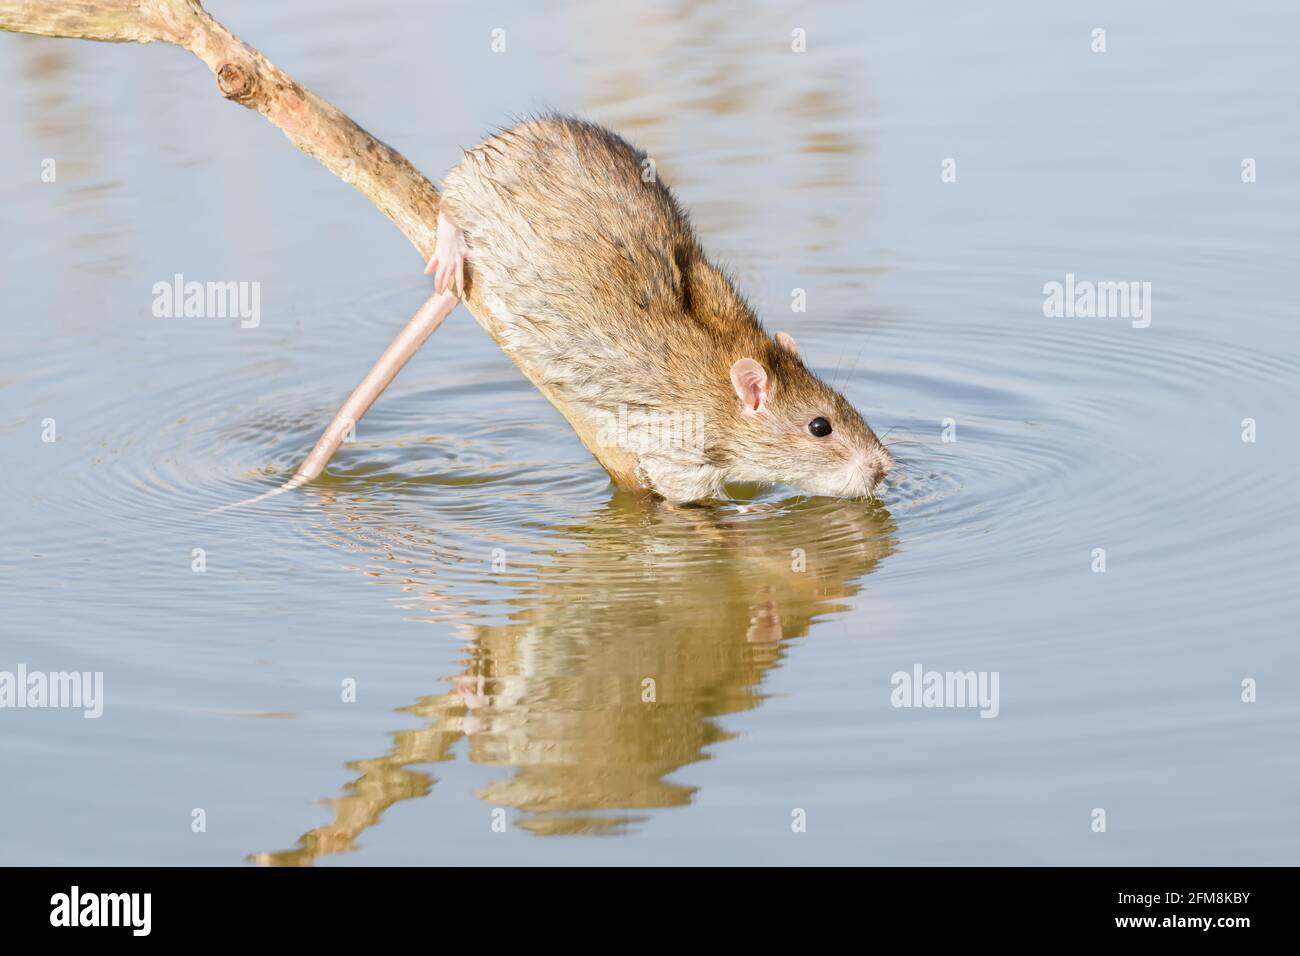 Common rat (Rattus norvegicus) descending into water from a perch on a lakeshore Stock Photo